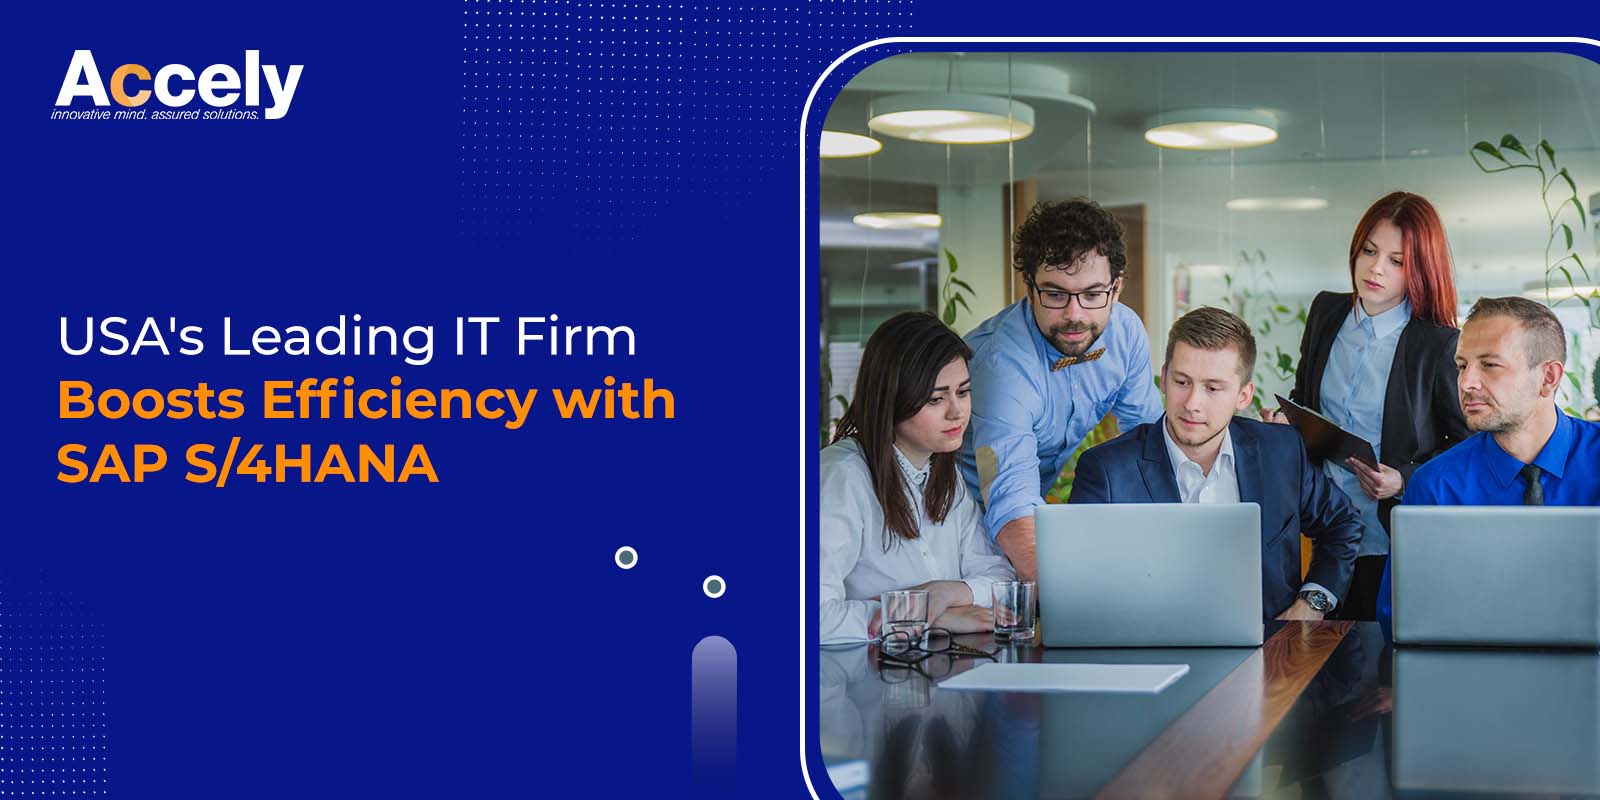 USA's Leading IT Firm Boosts Efficiency with SAP S/4HANA